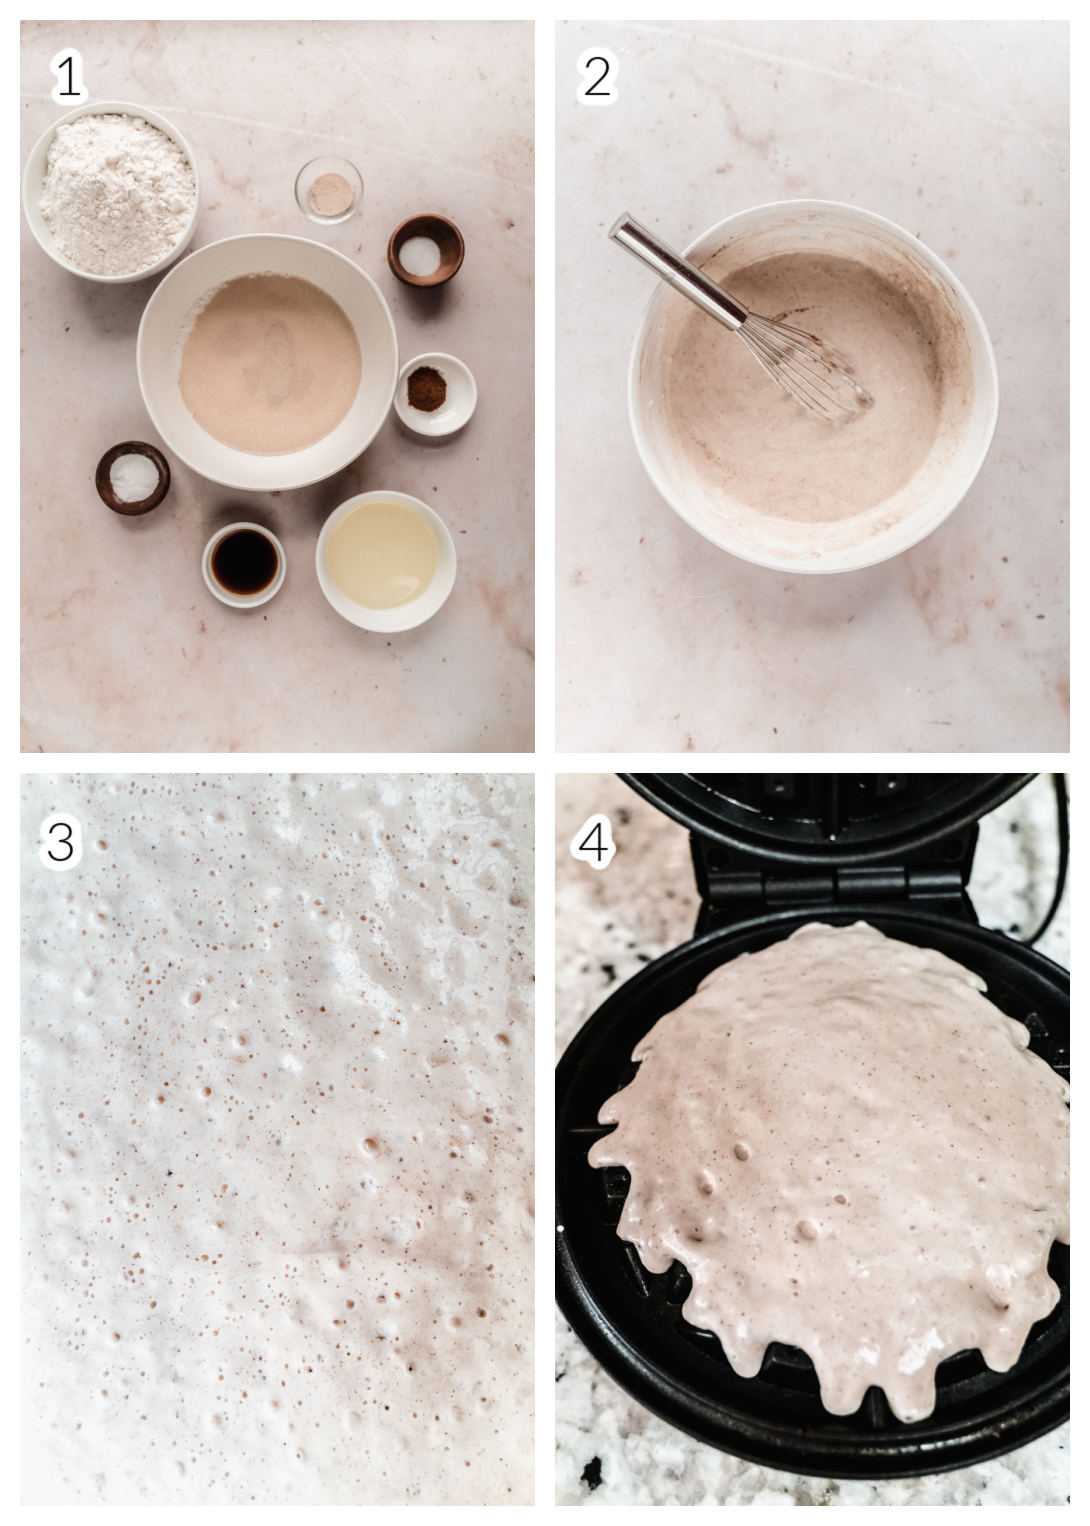 step by step process of making yeast waffles